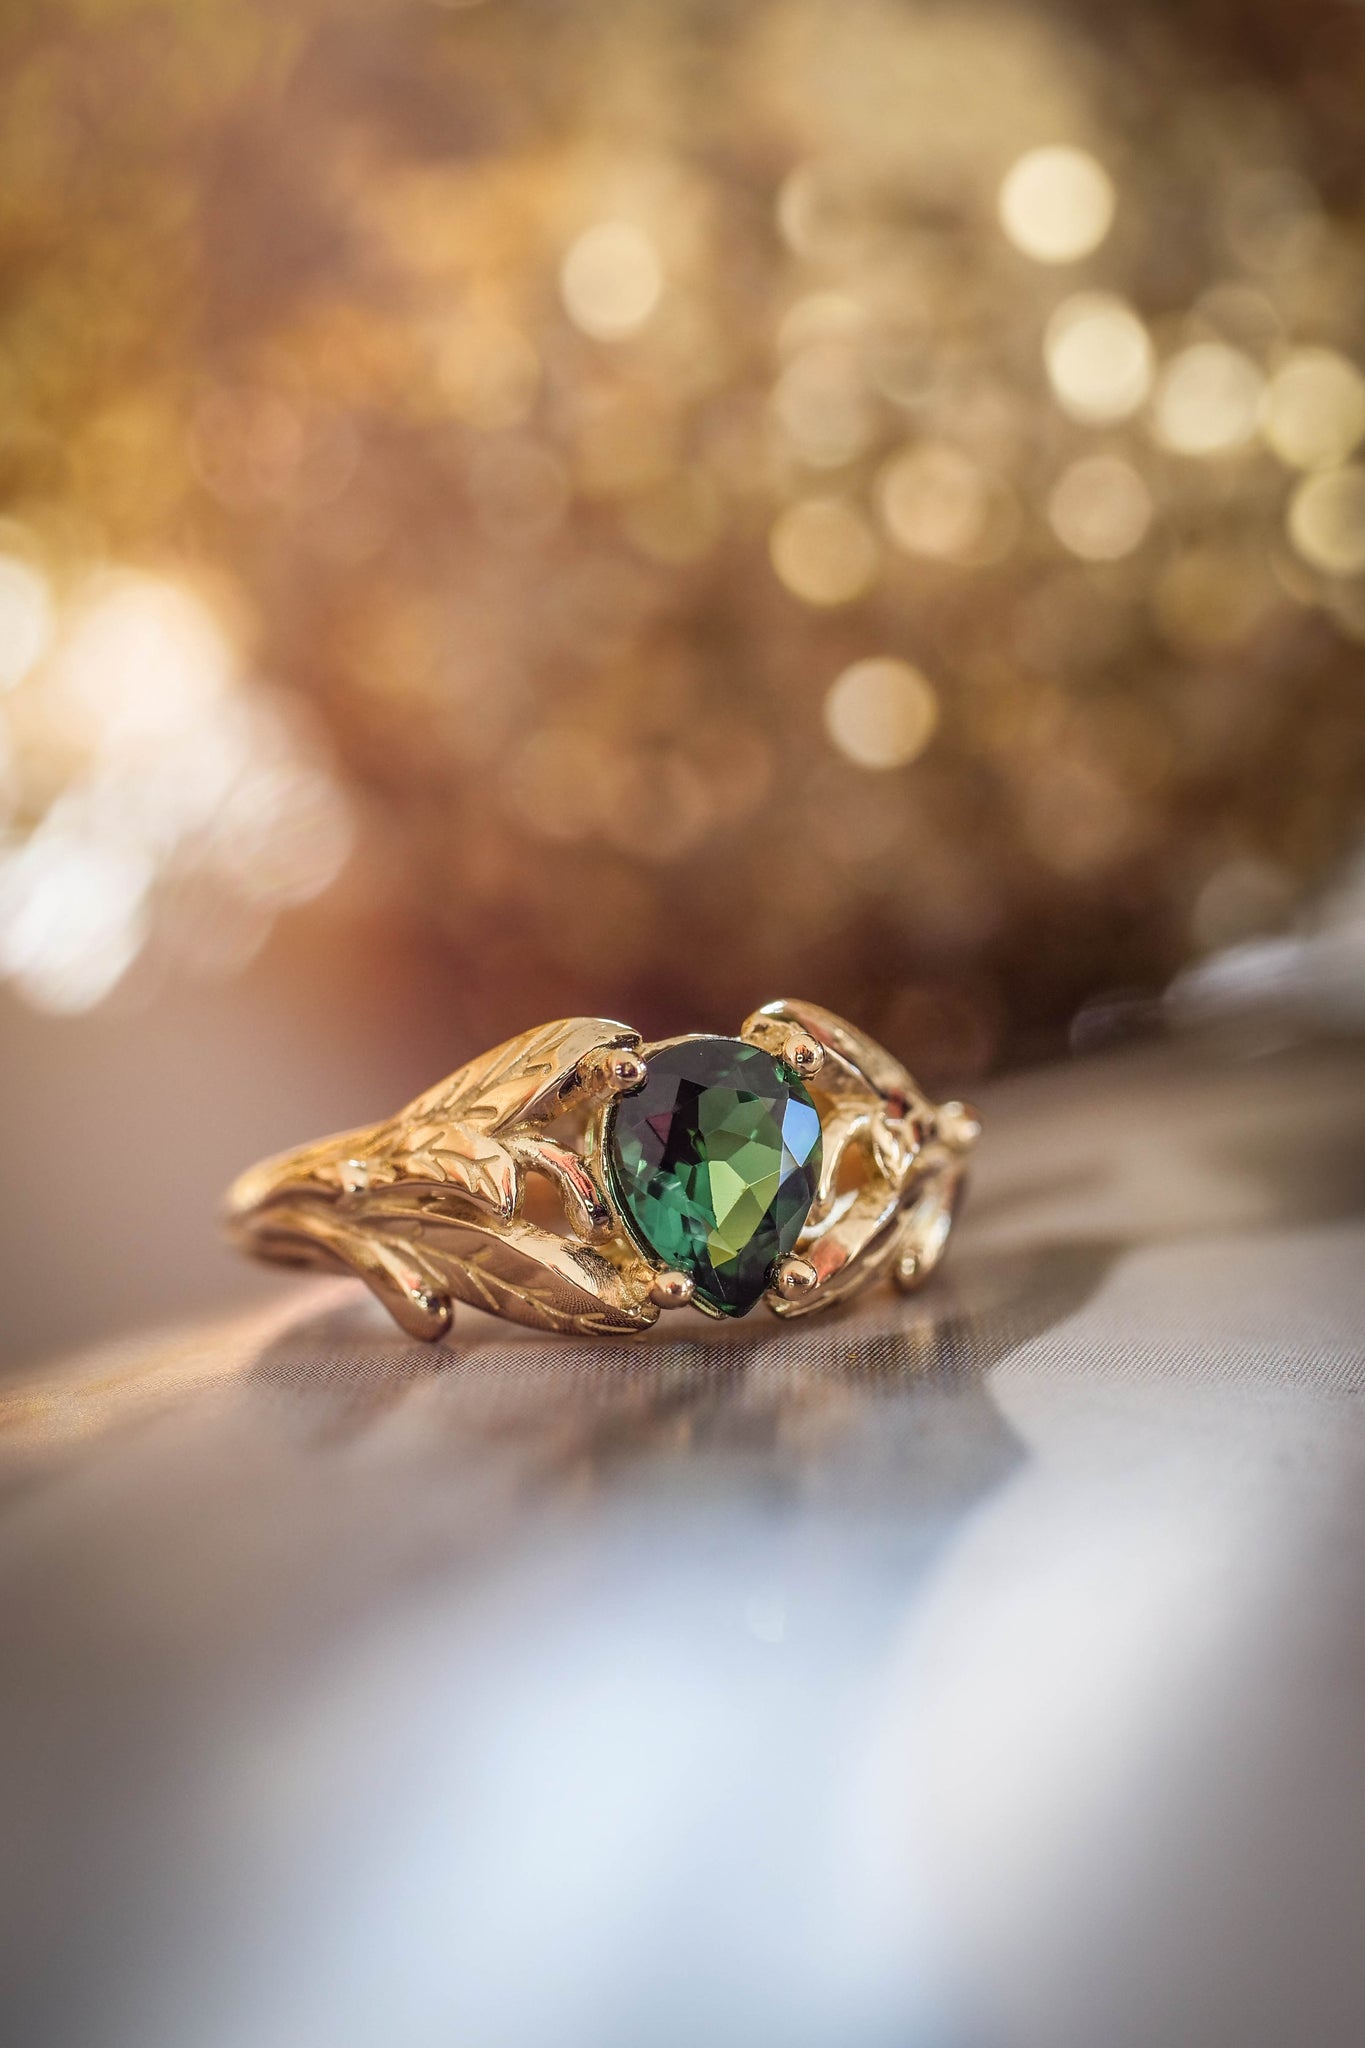 Gold leaf engagement ring with green tourmaline / Wisteria - Eden Garden Jewelry™